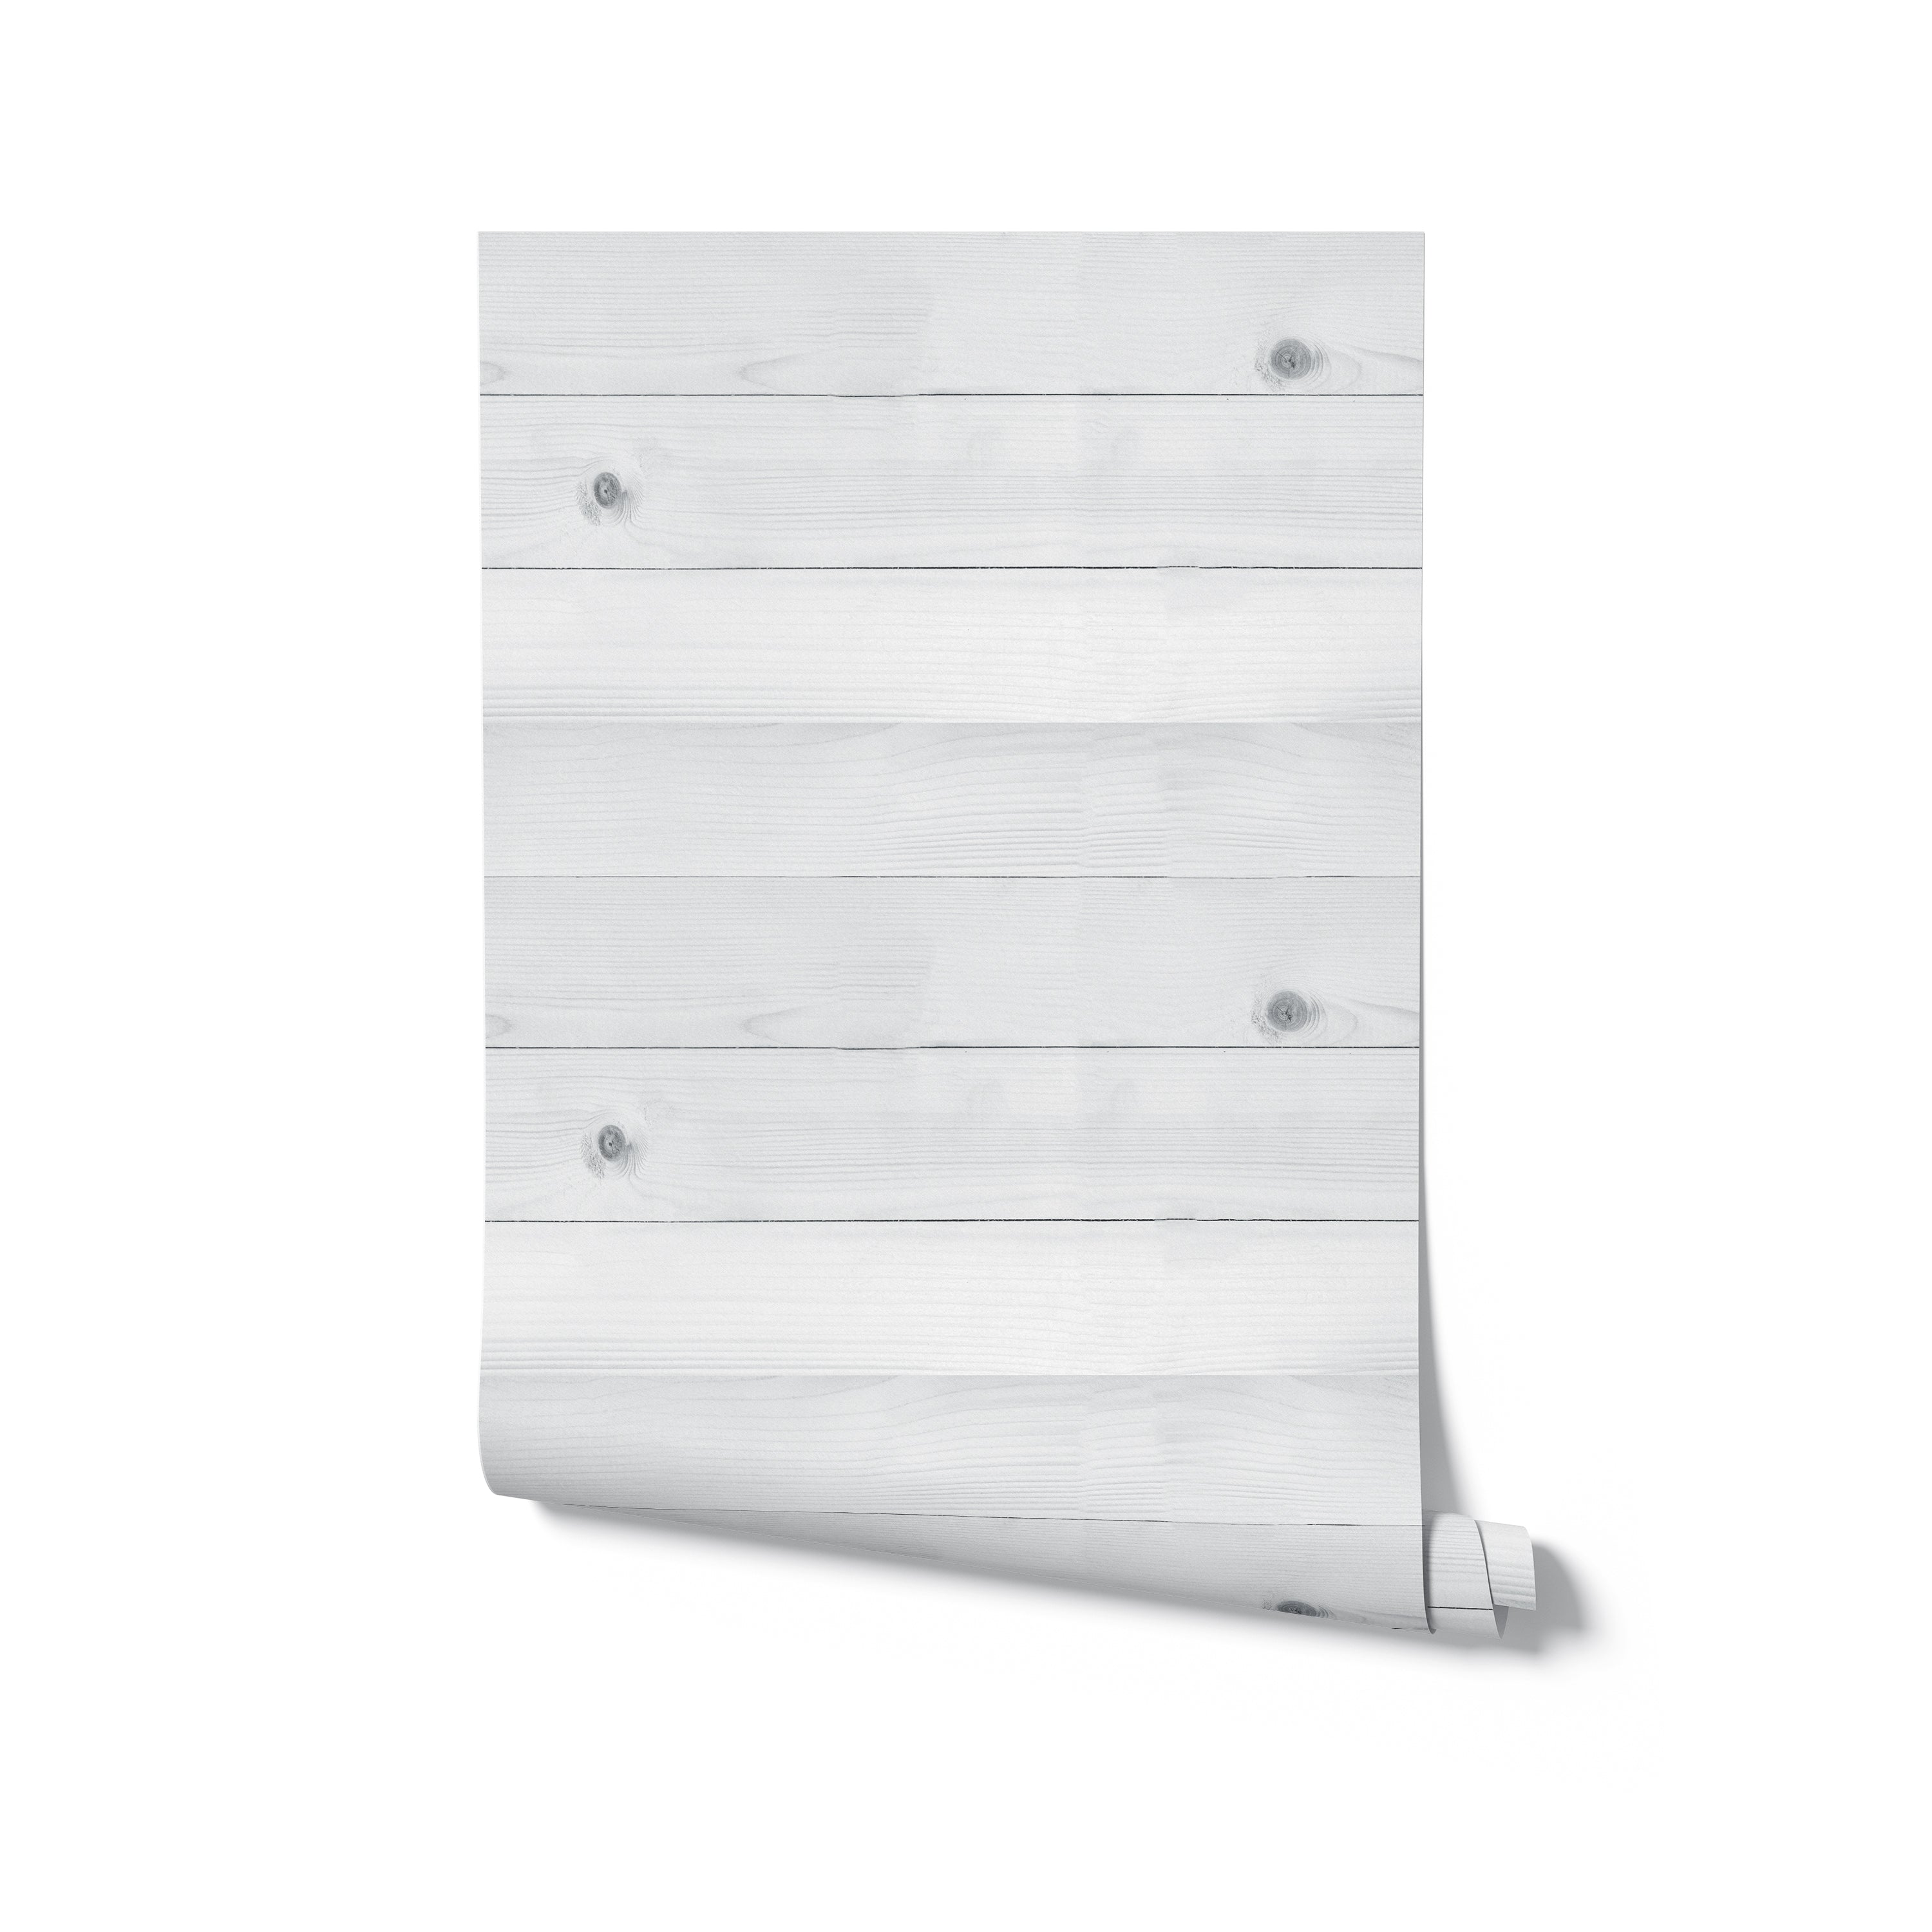 A roll of Realistic Wooden Wallpaper partially unrolled to reveal the print of white painted wooden planks, emphasizing the wallpaper's texture and realistic wooden appearance